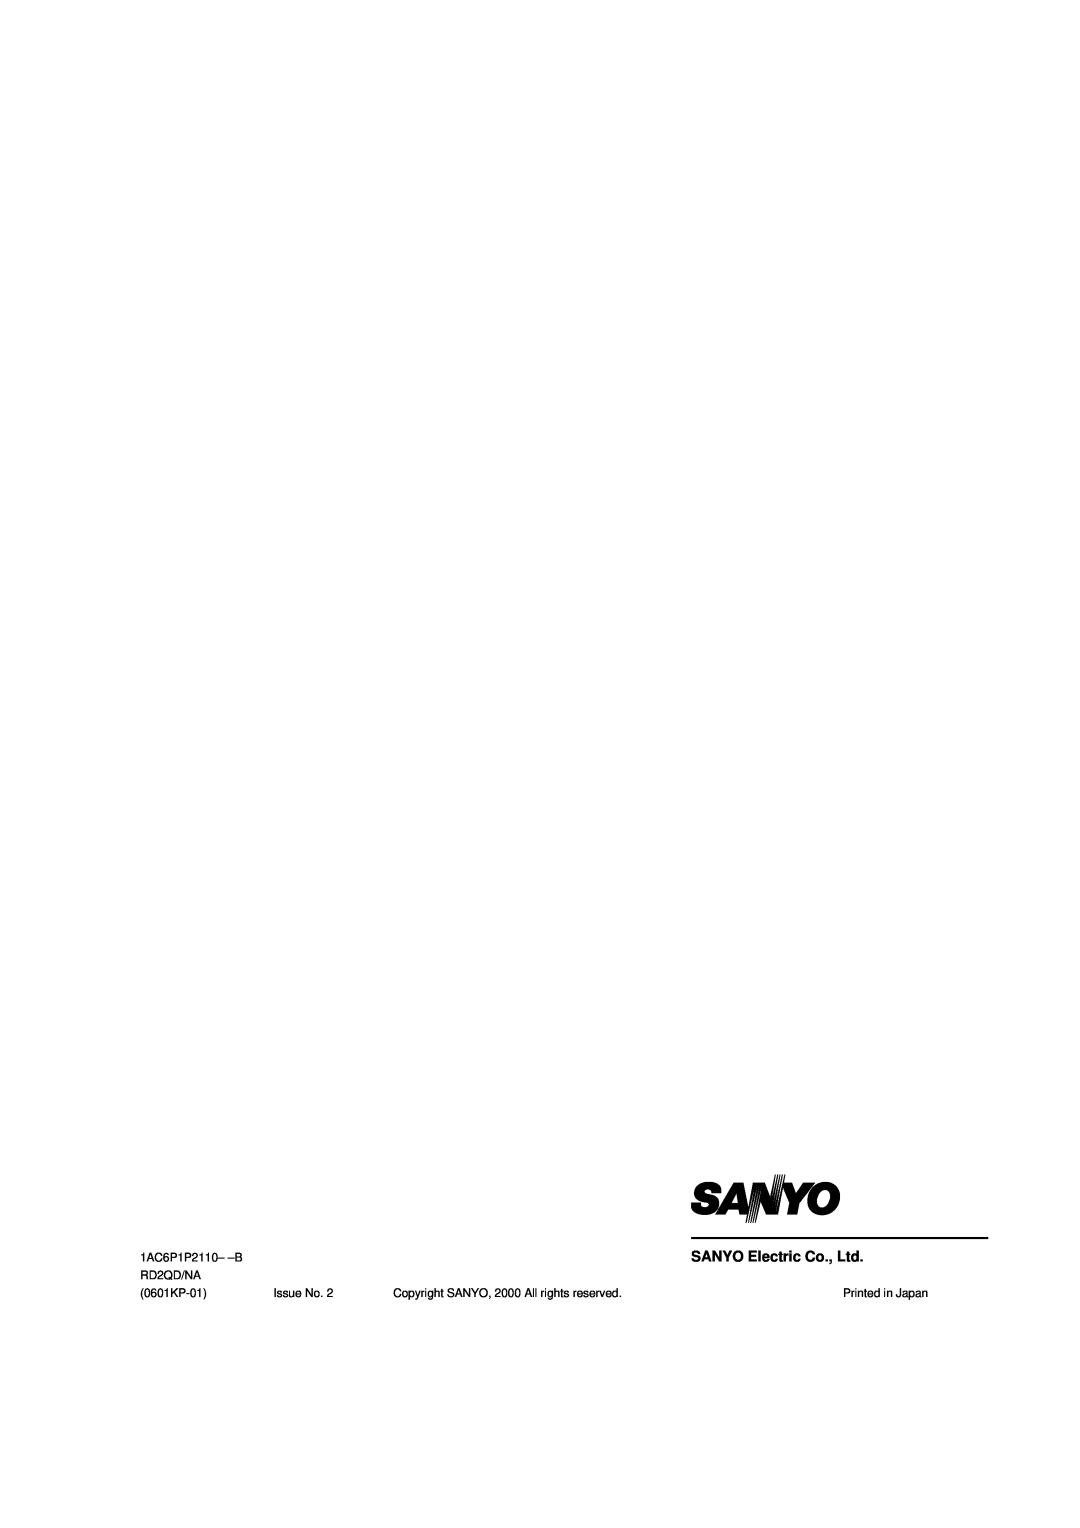 Sanyo 1AC6P1P2110- -B RD2QD/NA, 0601KP-01, Issue No, Printed in Japan, Copyright SANYO, 2000 All rights reserved 